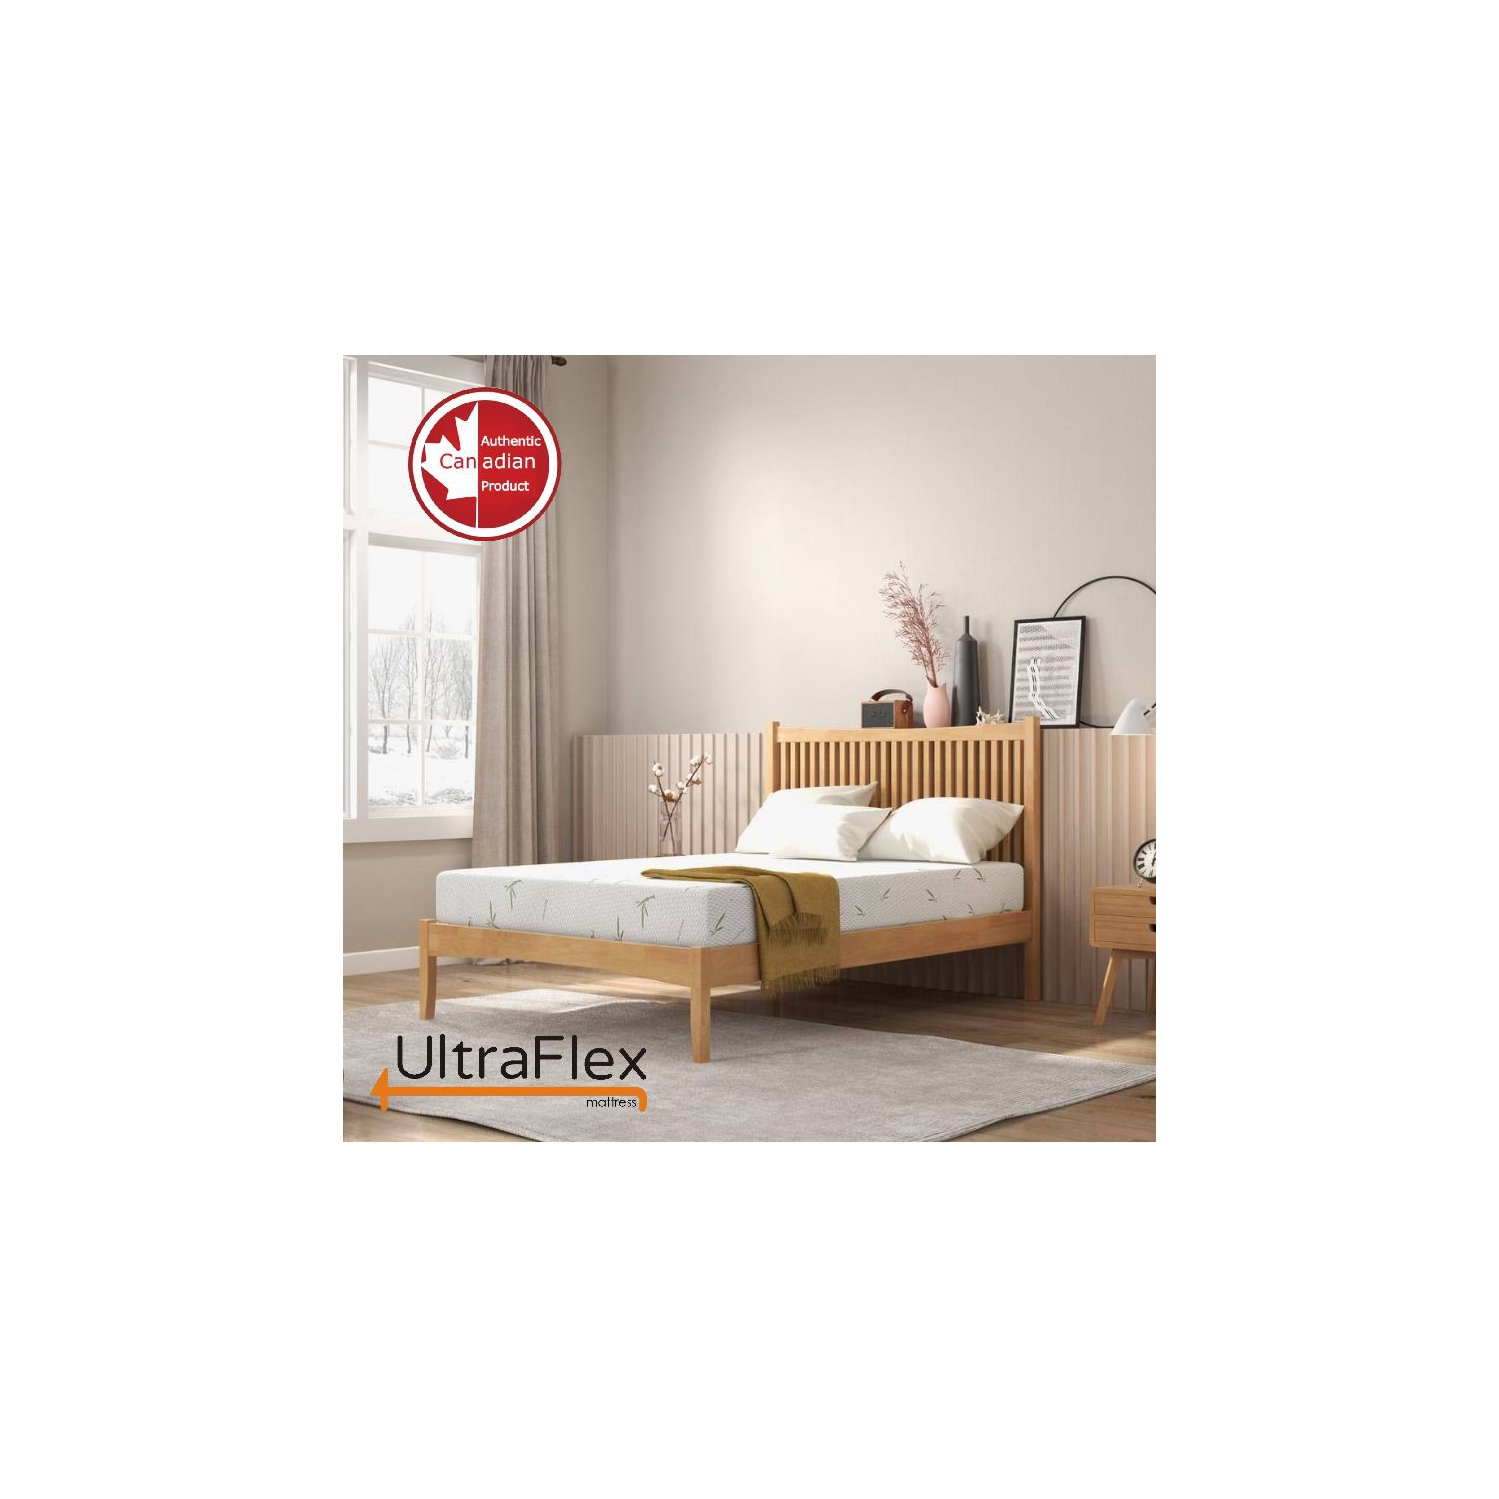 UltraFlex EasySleep Mattress- Canadian-Made Medium Firm Gel Infused Reversible Comfort, Pressure Relief, Bamboo Cover, CertiPUR-US® Certified Foam, Made in Canada- Double Size